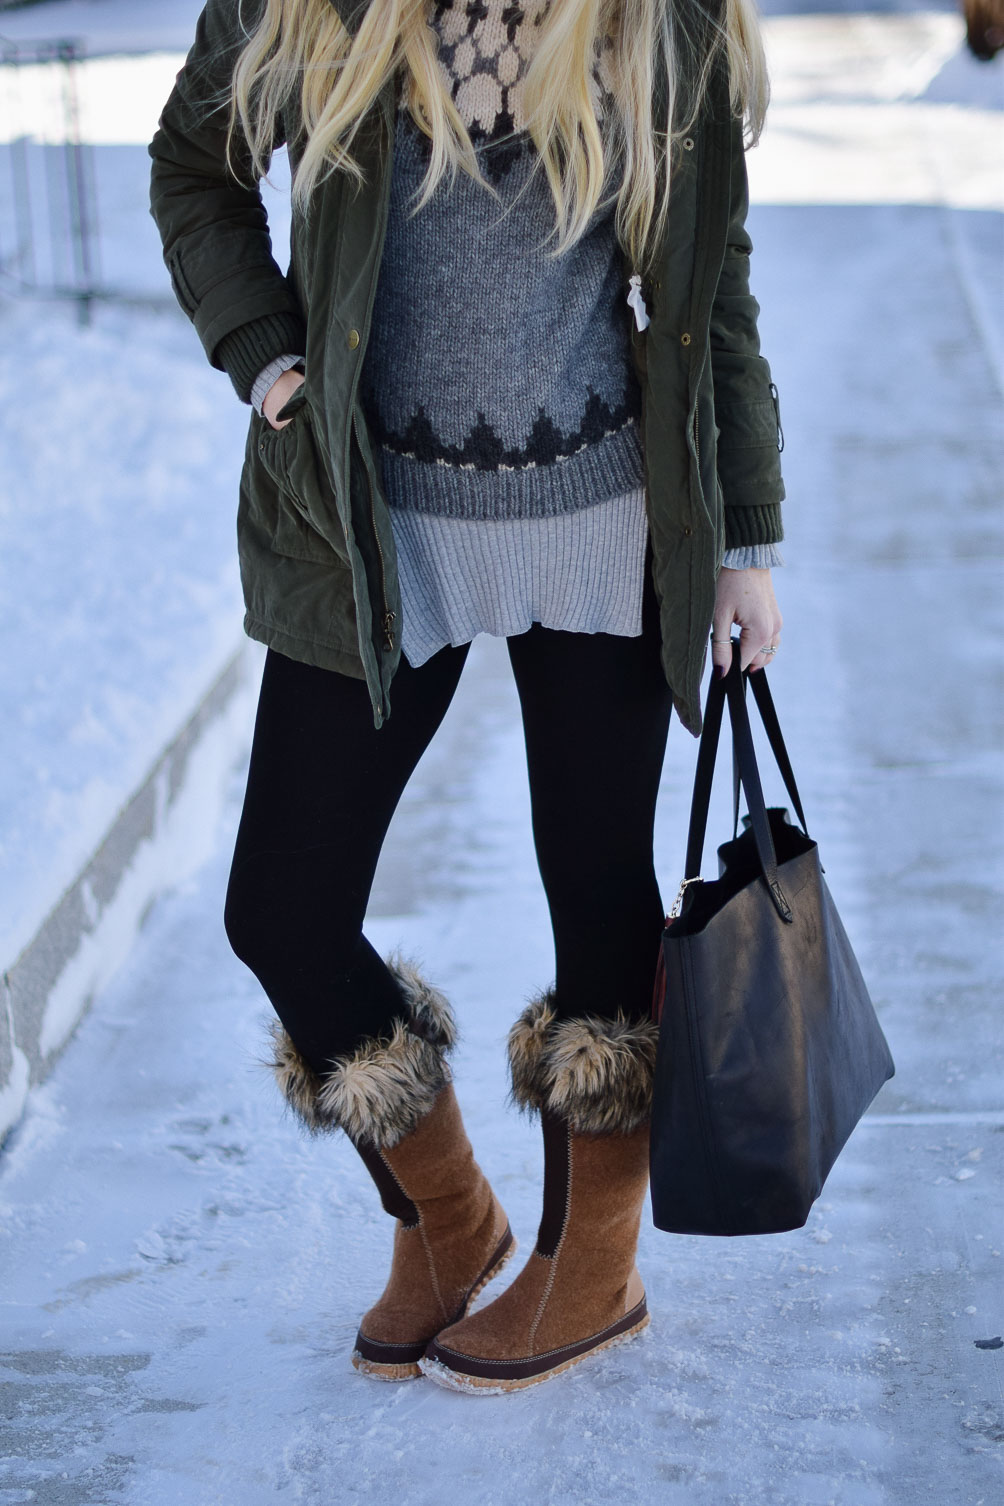 styling wool winter boots with faux fur accents, a turtleneck sweater, and velvet lined leggings 